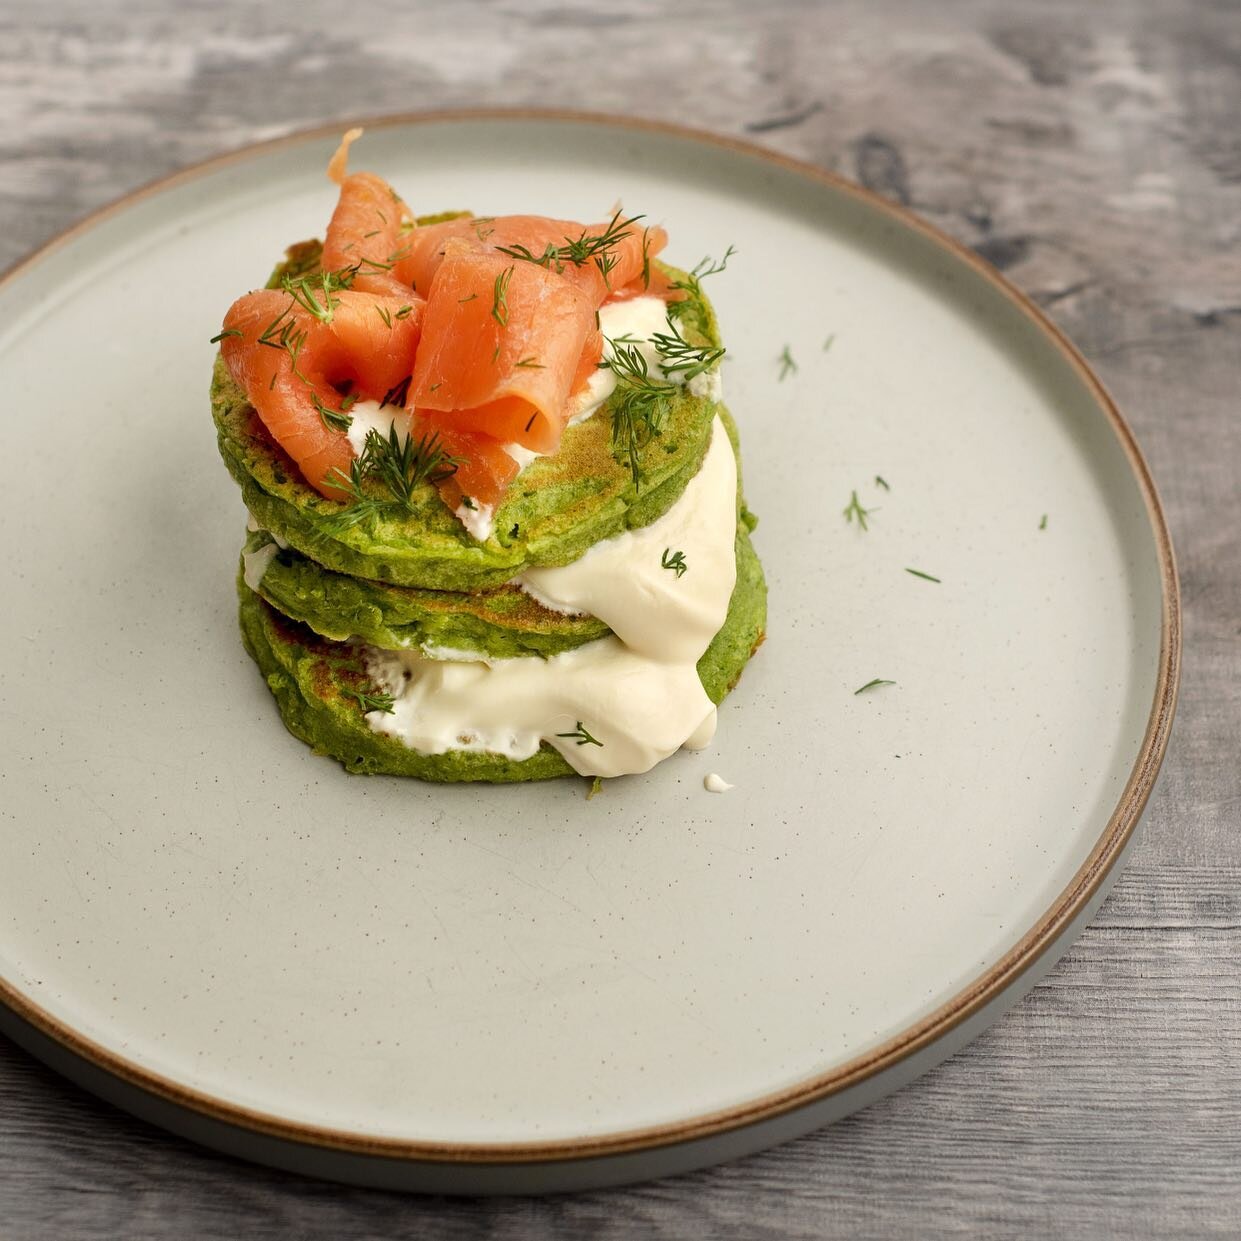 Looking forward to 2021 as you would to these pancakes... 🥳
.
.
.
The Popeye pancakes with smoked salmon and soured cream. From our new menu available from January.
.

#breakfastinlondon #foodforfoodies #containercafe #newmenu #madeineastlondon #tri